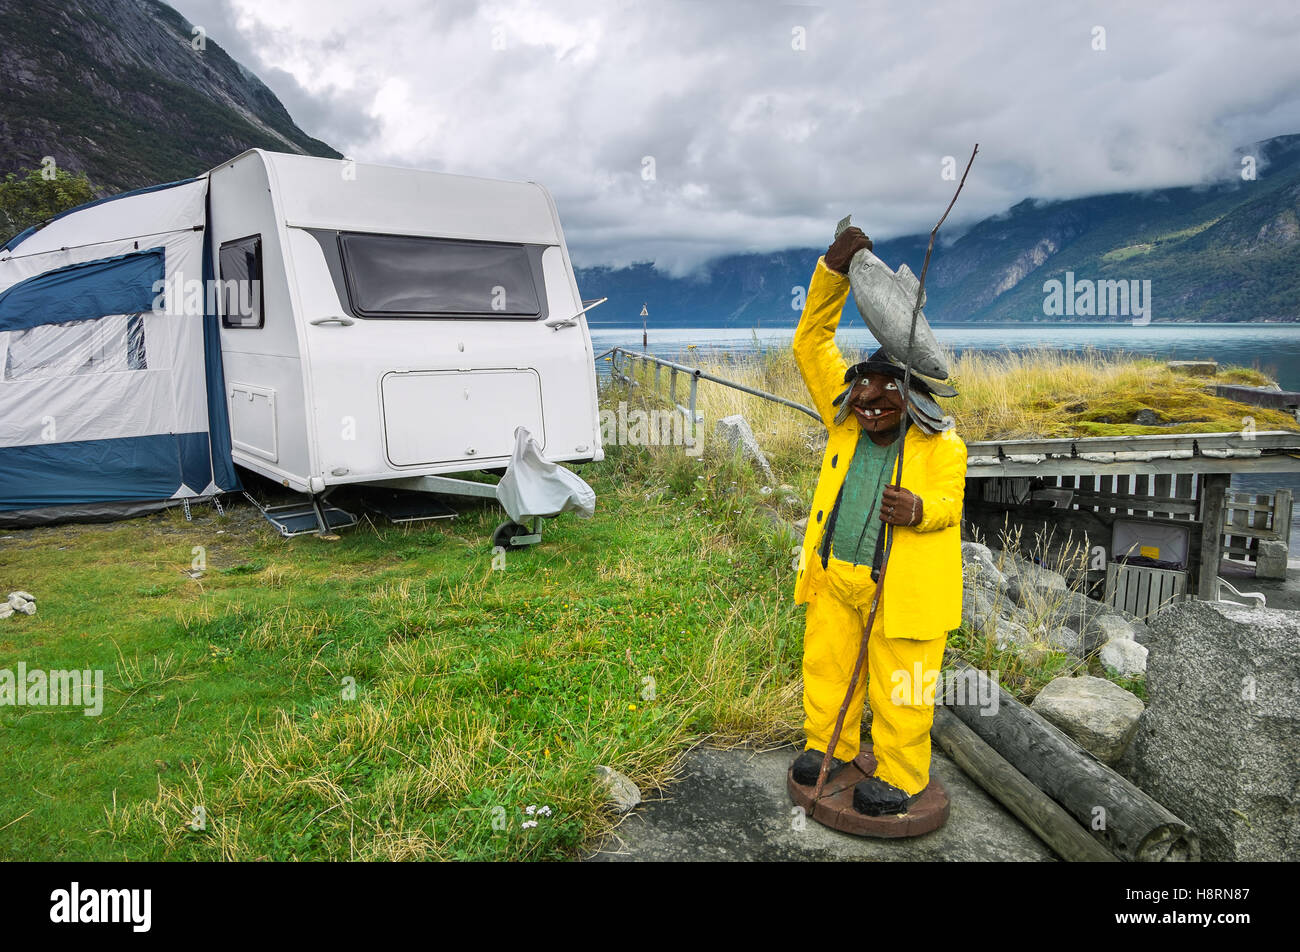 Fishing camp with wooden troll in Eidfjord. Norway, Scandinavia Stock Photo